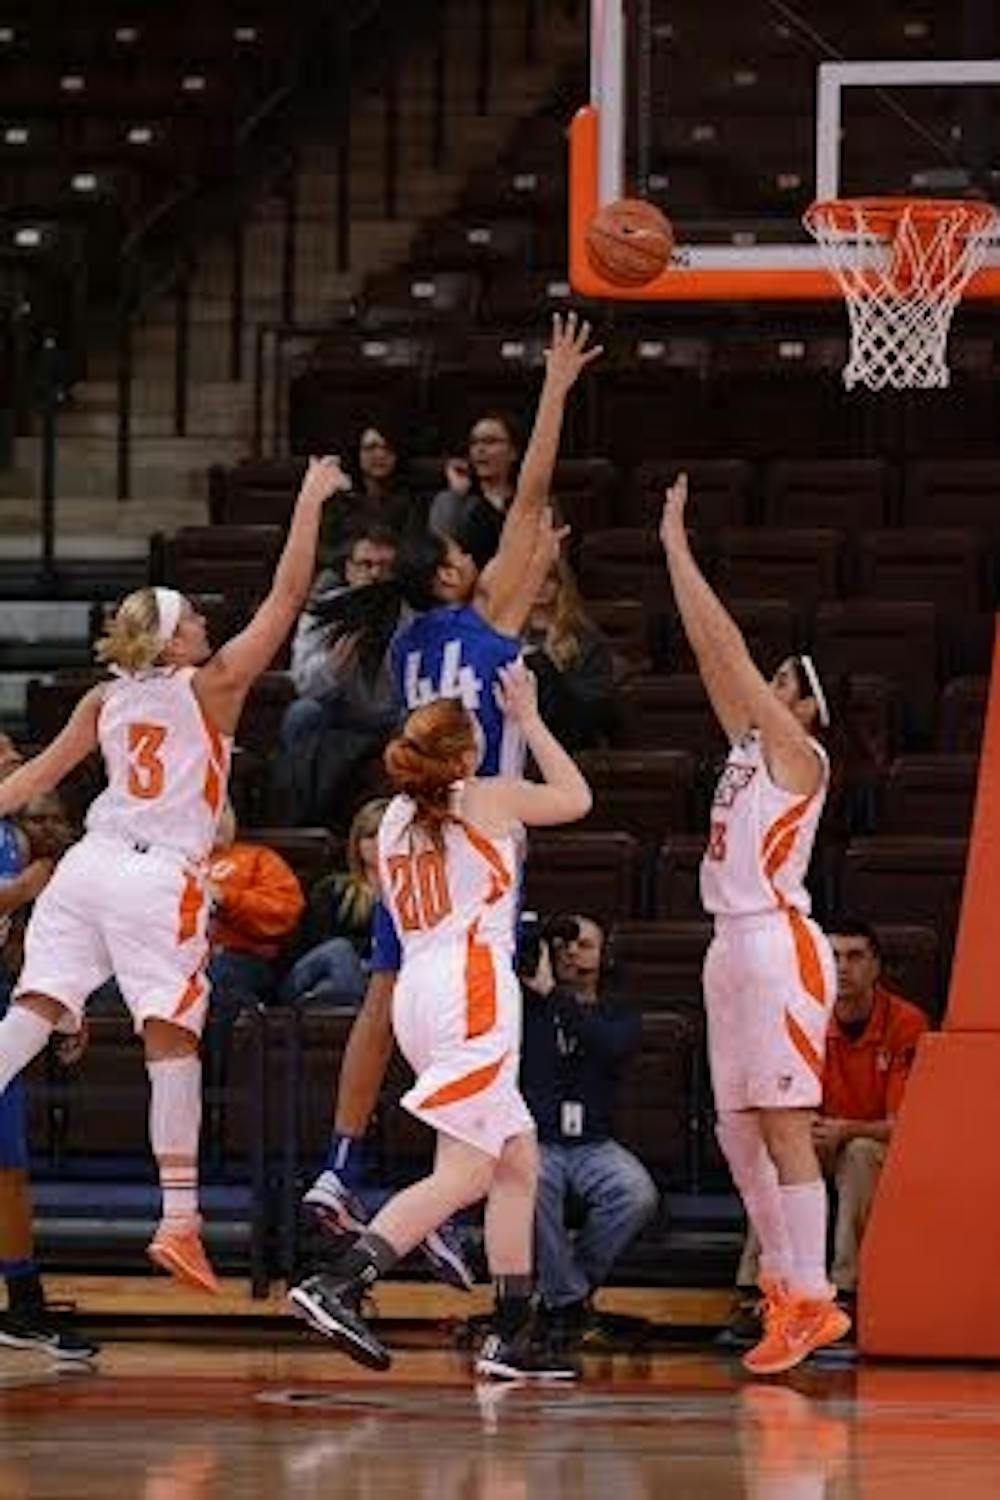 <p>Senior forward Christa Baccas scores a layup during Wednesday's 55-47 victory over Bowling Green.</p>